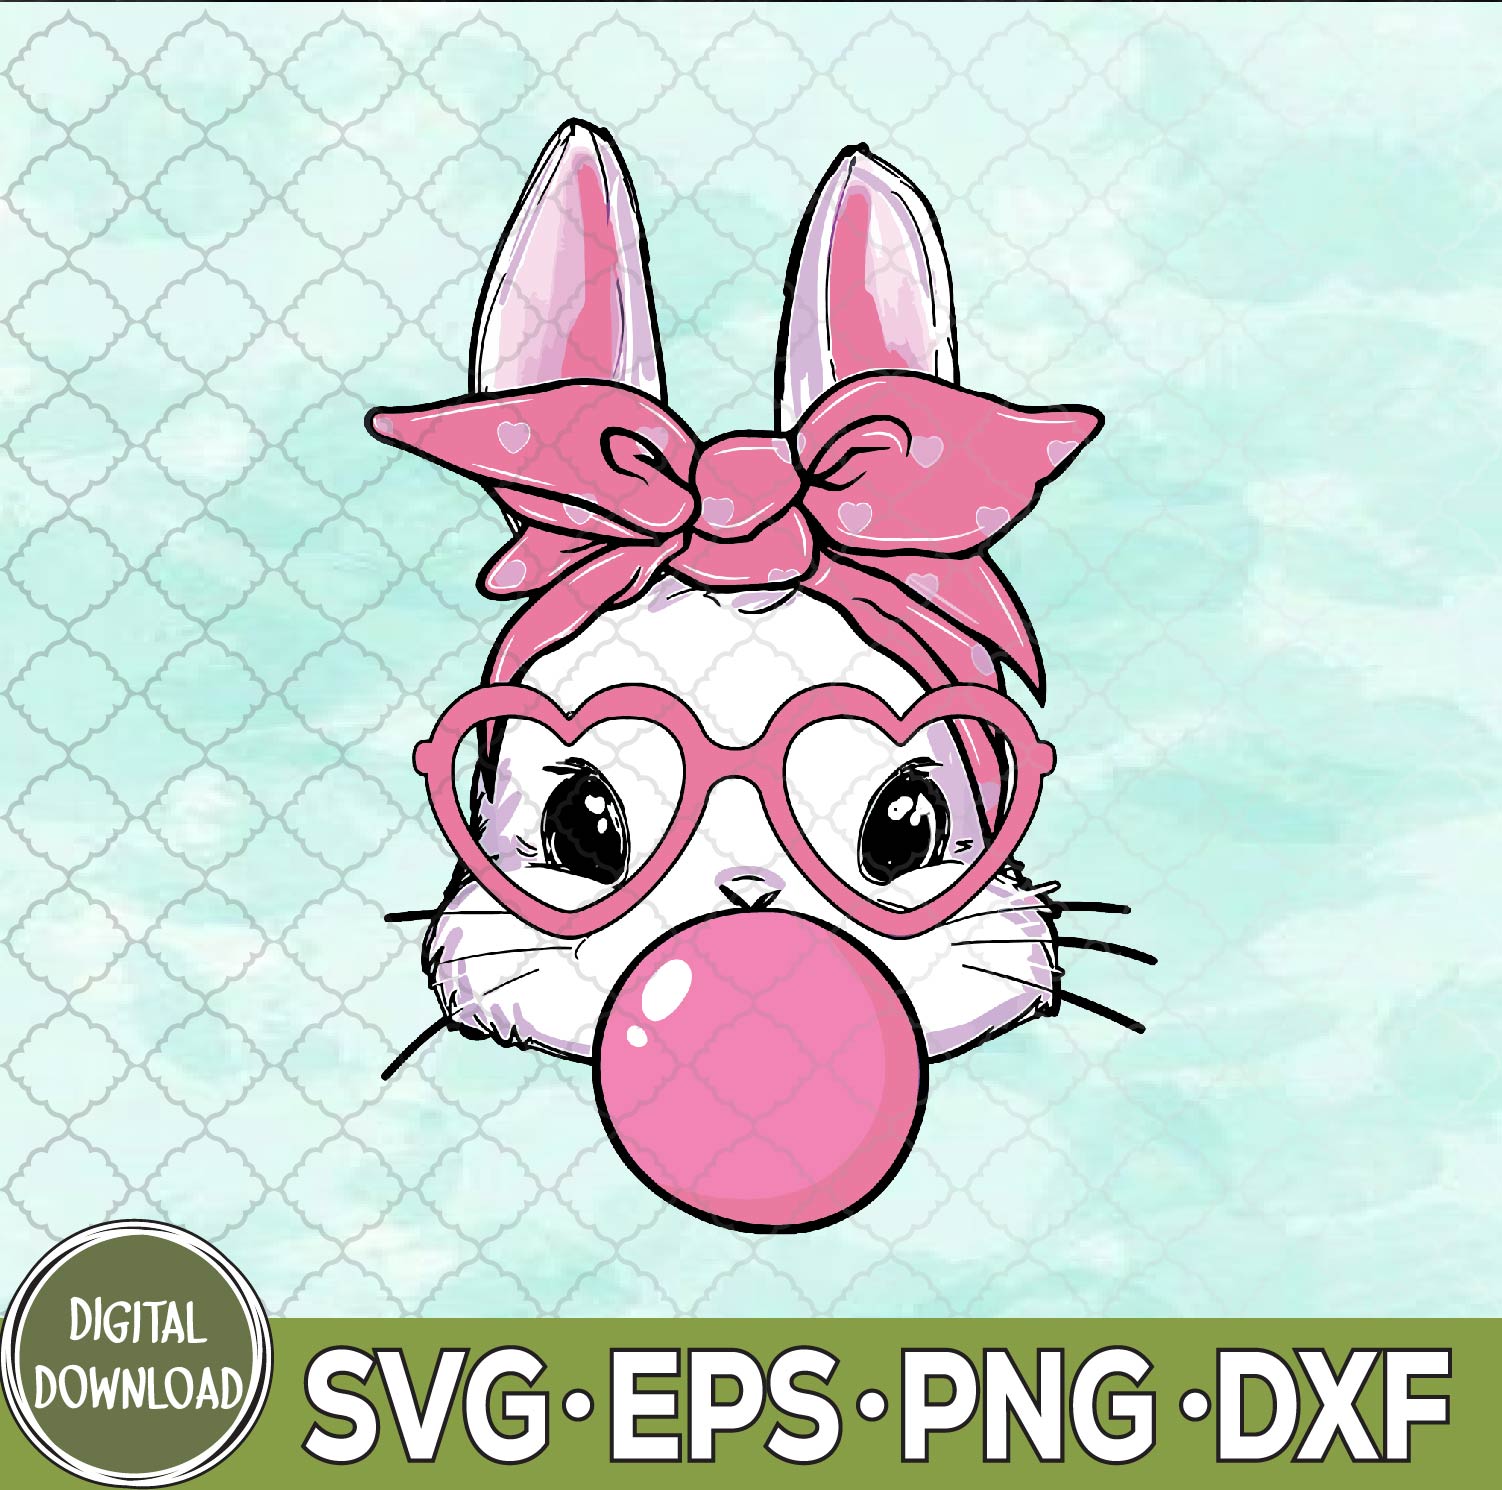 WTMNEW9file 09 111 Cute Rabbit Bunny Blowing Bubble Gum Easter Day Svg, Easter Svg, Bunny With Heart Glasses Svg, Eps, Png, Dxf